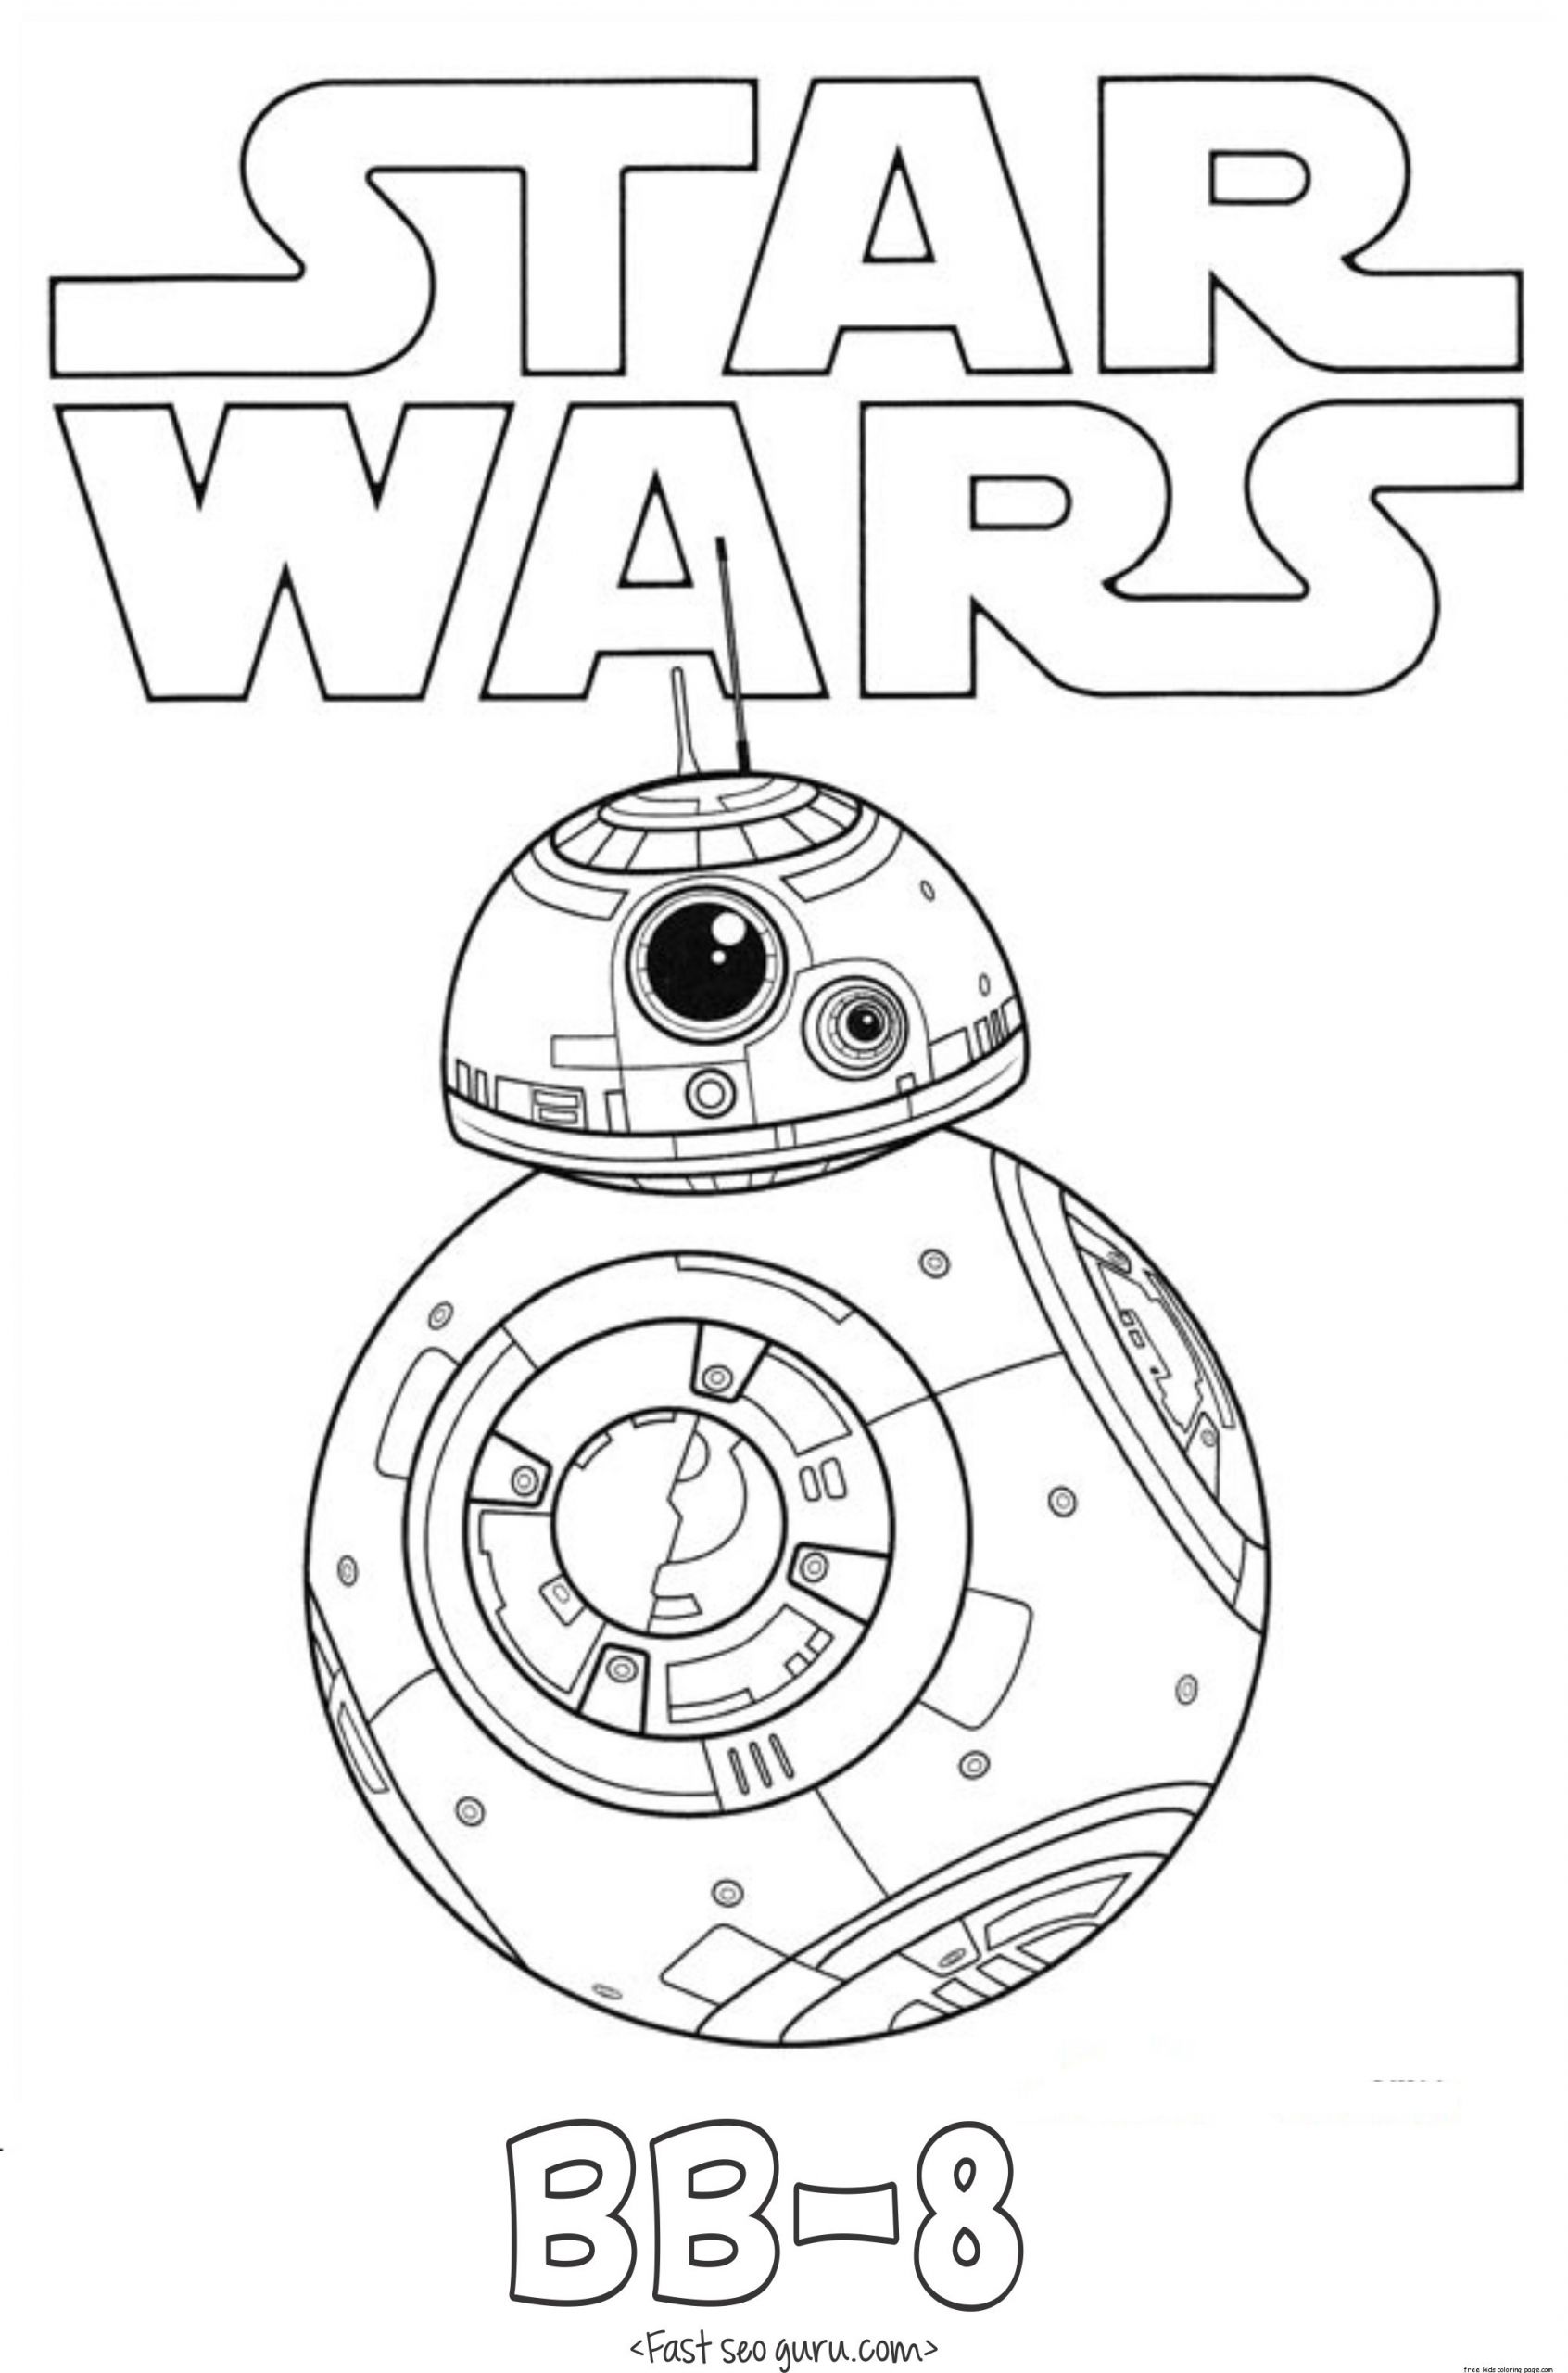 Star Wars Coloring Pages For Kids
 Star Wars The Force Awakens BB 8 coloring pages Free